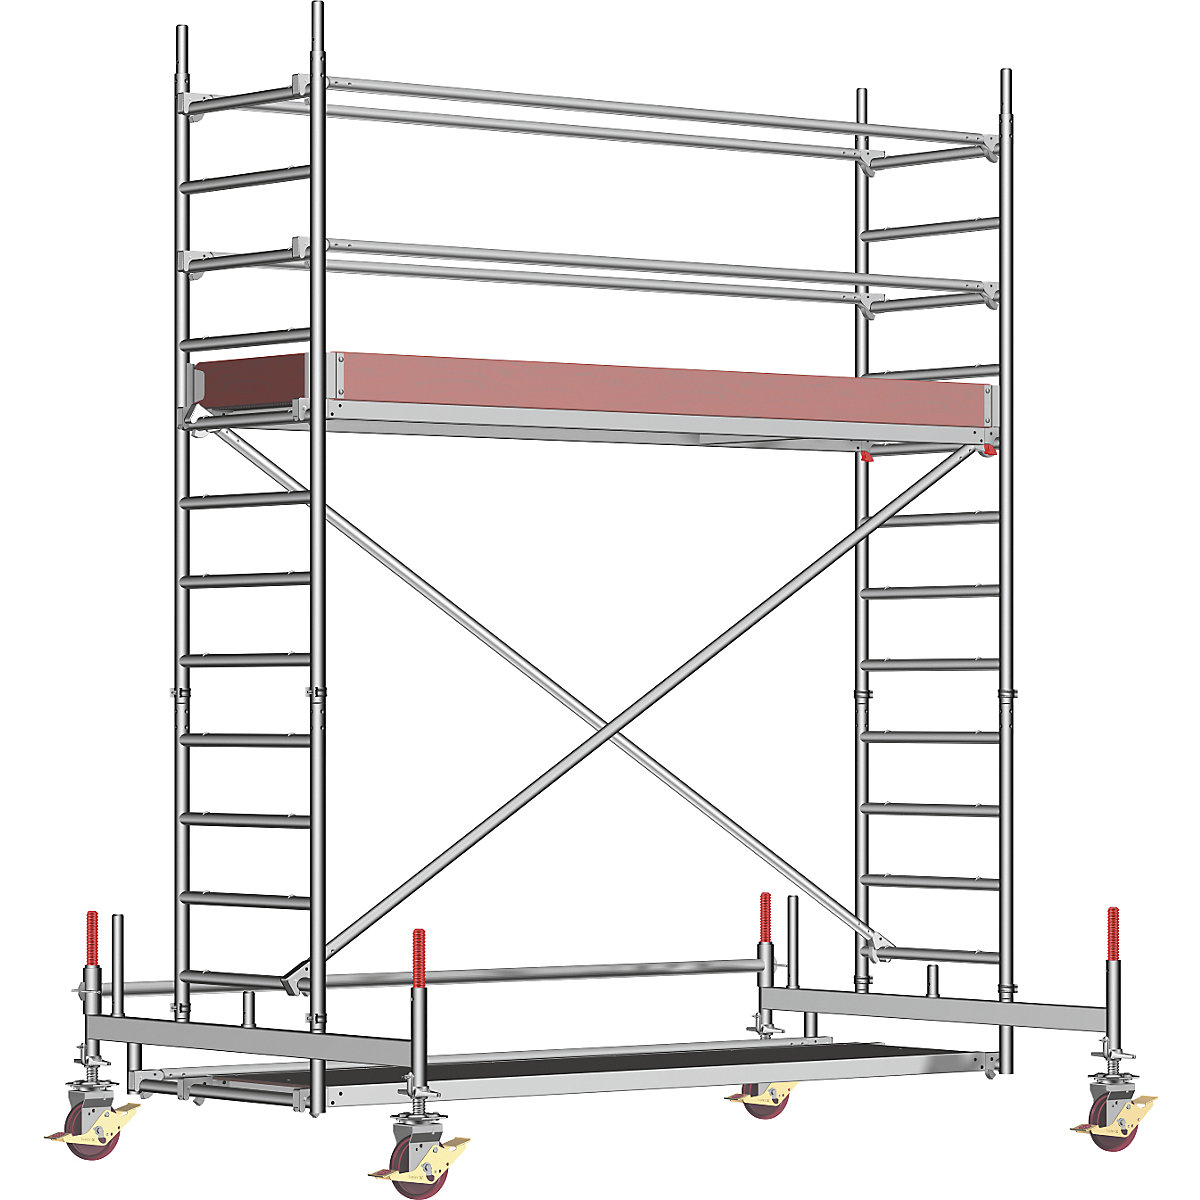 Universal mobile access tower – Layher, standard model, scaffolding height 3.58 m-10